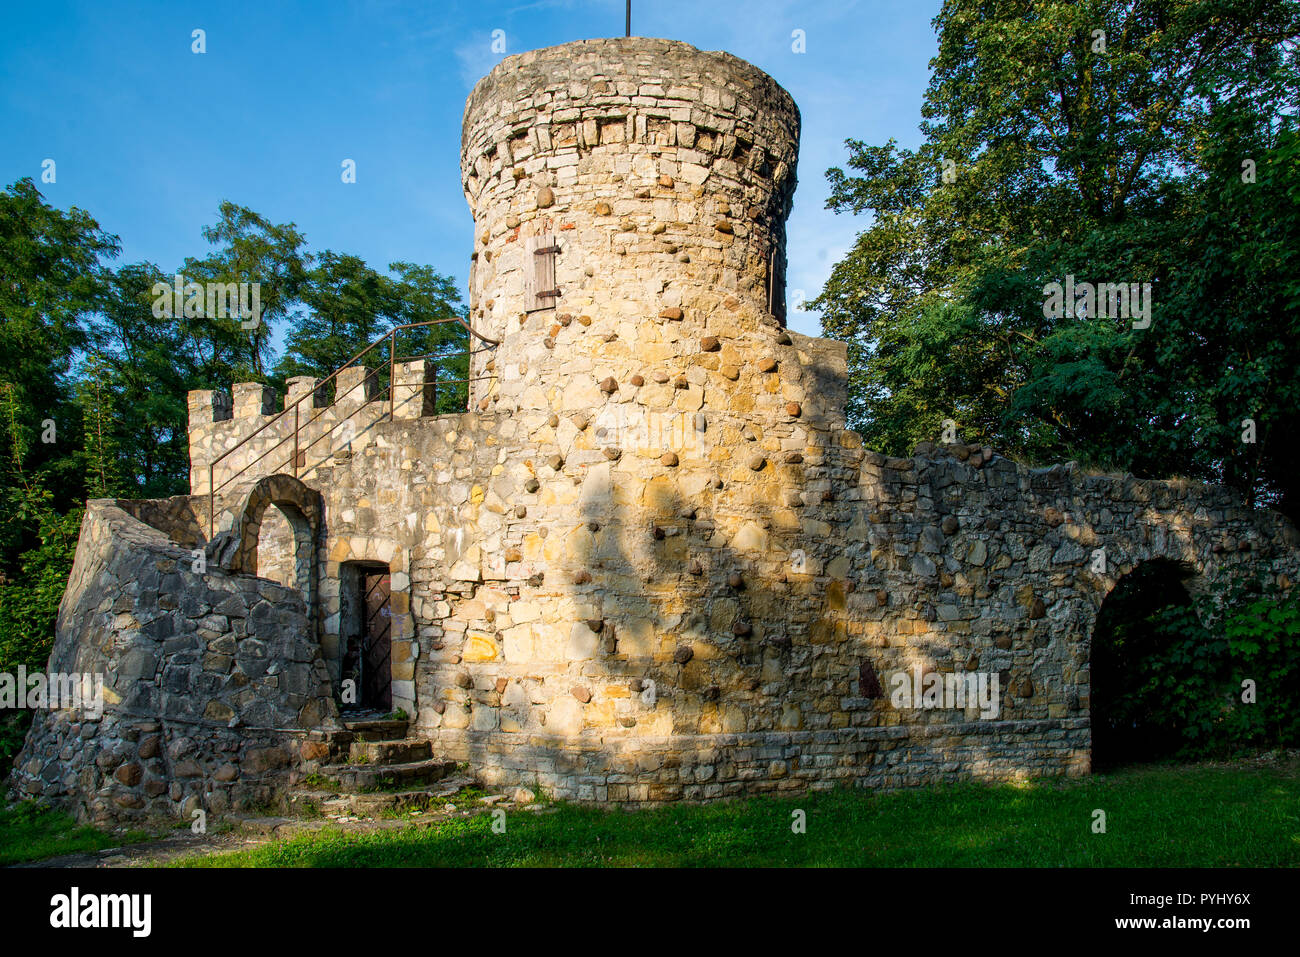 Ruins of the medieval city walls with a tower in Krapkowice, Opole province. Poland Stock Photo